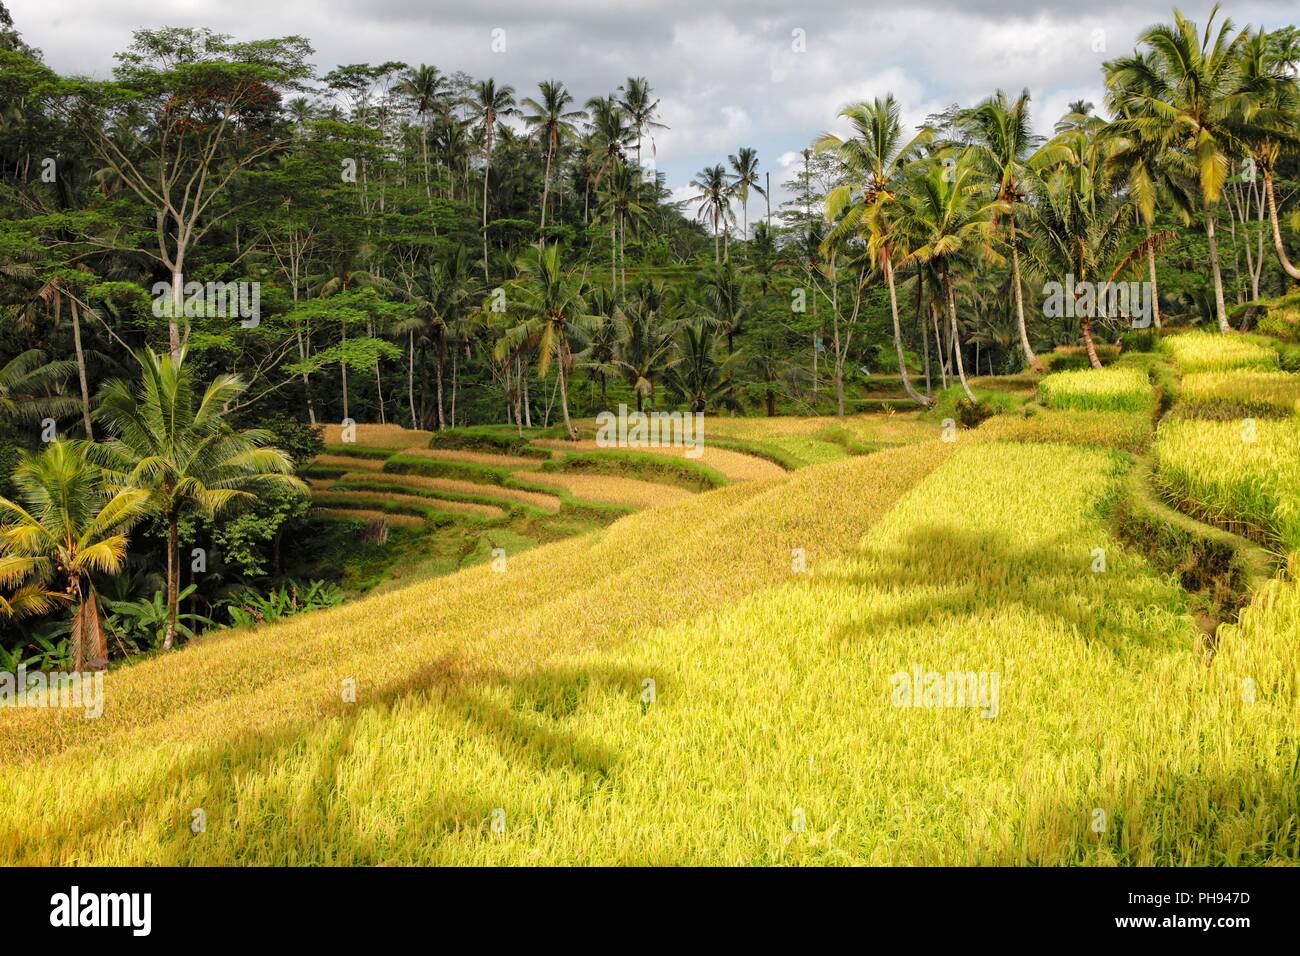 Bellissime risaie a Bali Indonesia Foto Stock